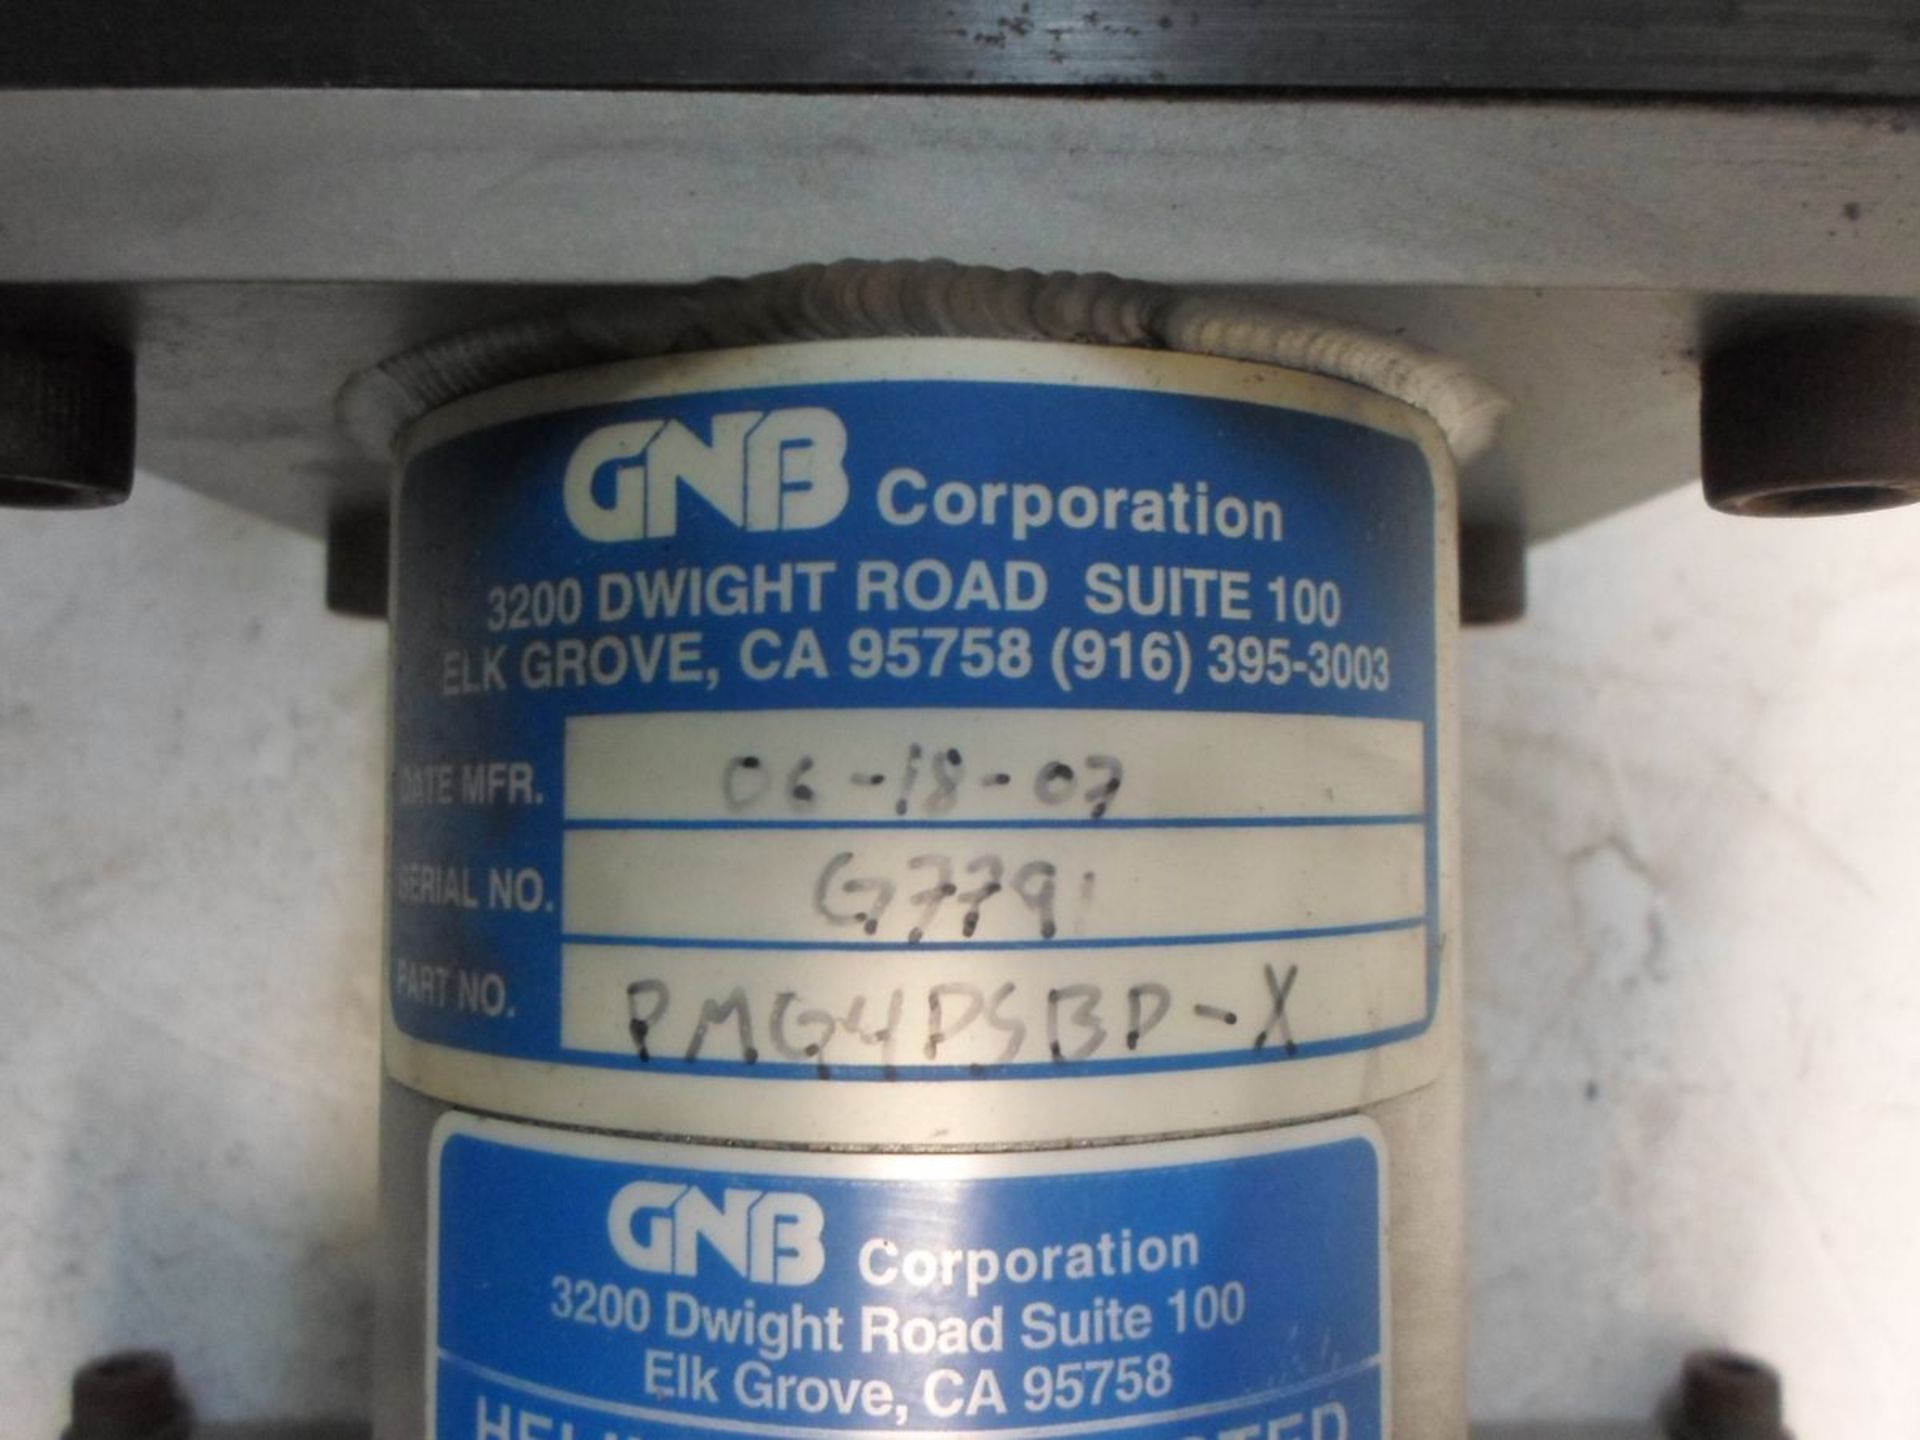 4" GNB CORPORATION PMG4PSBP-X STAINLESS STEEL GATE VALVE - Image 2 of 2